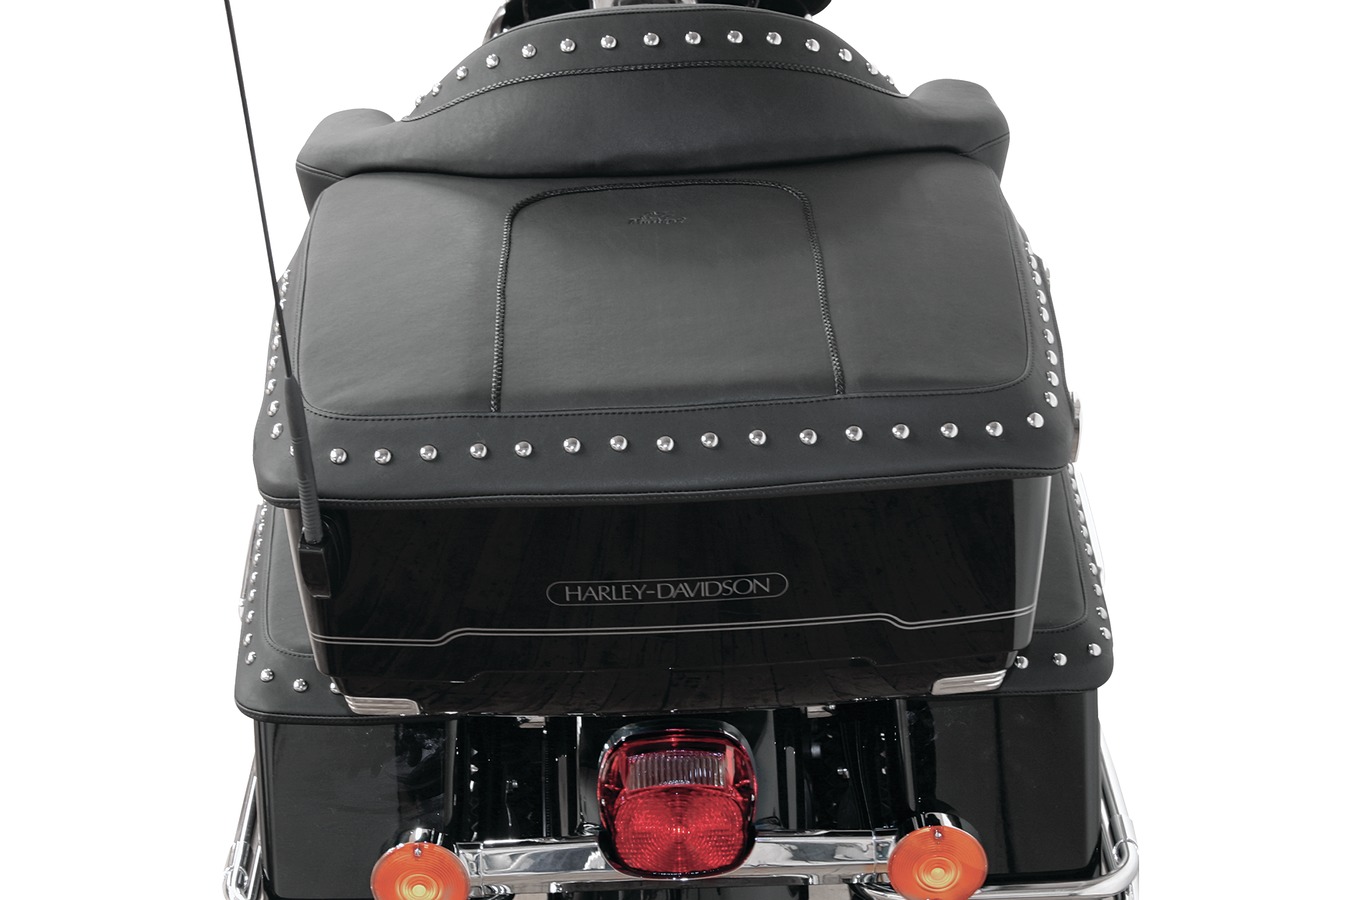 Tour-Pak® Lid Covers for Harley-Davidson FL Touring 